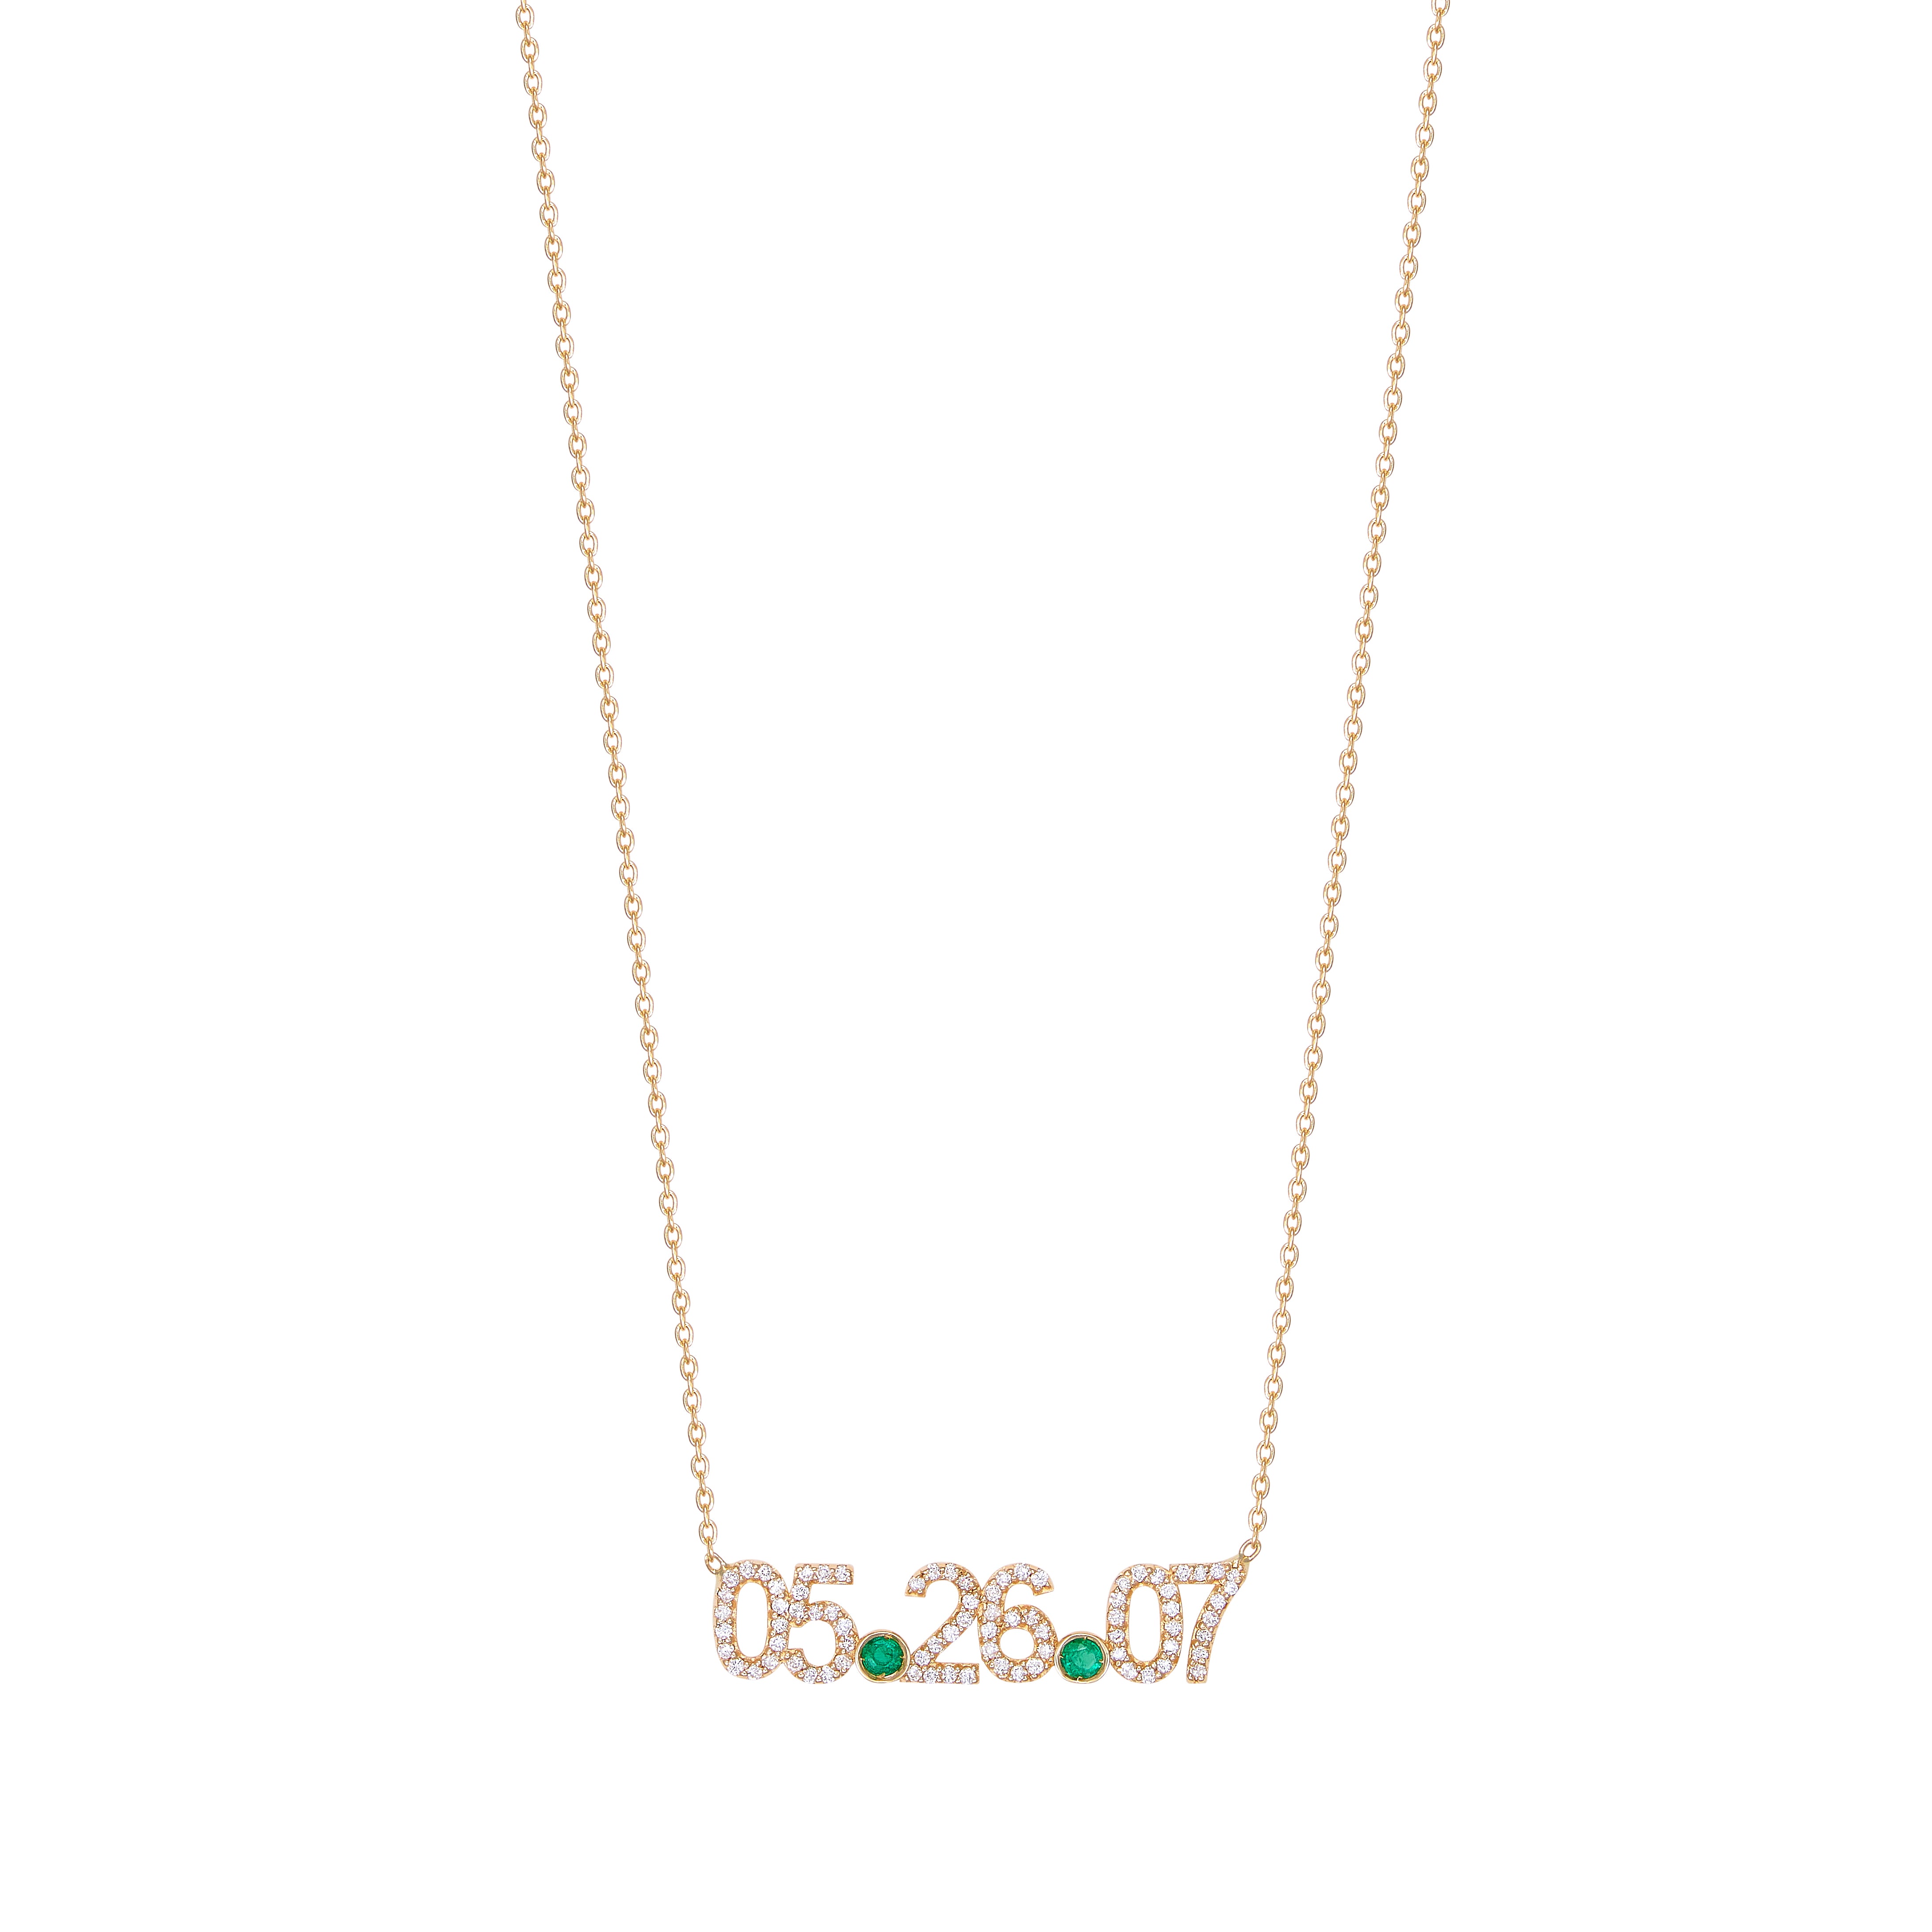 Diamond Date or Initials Necklace